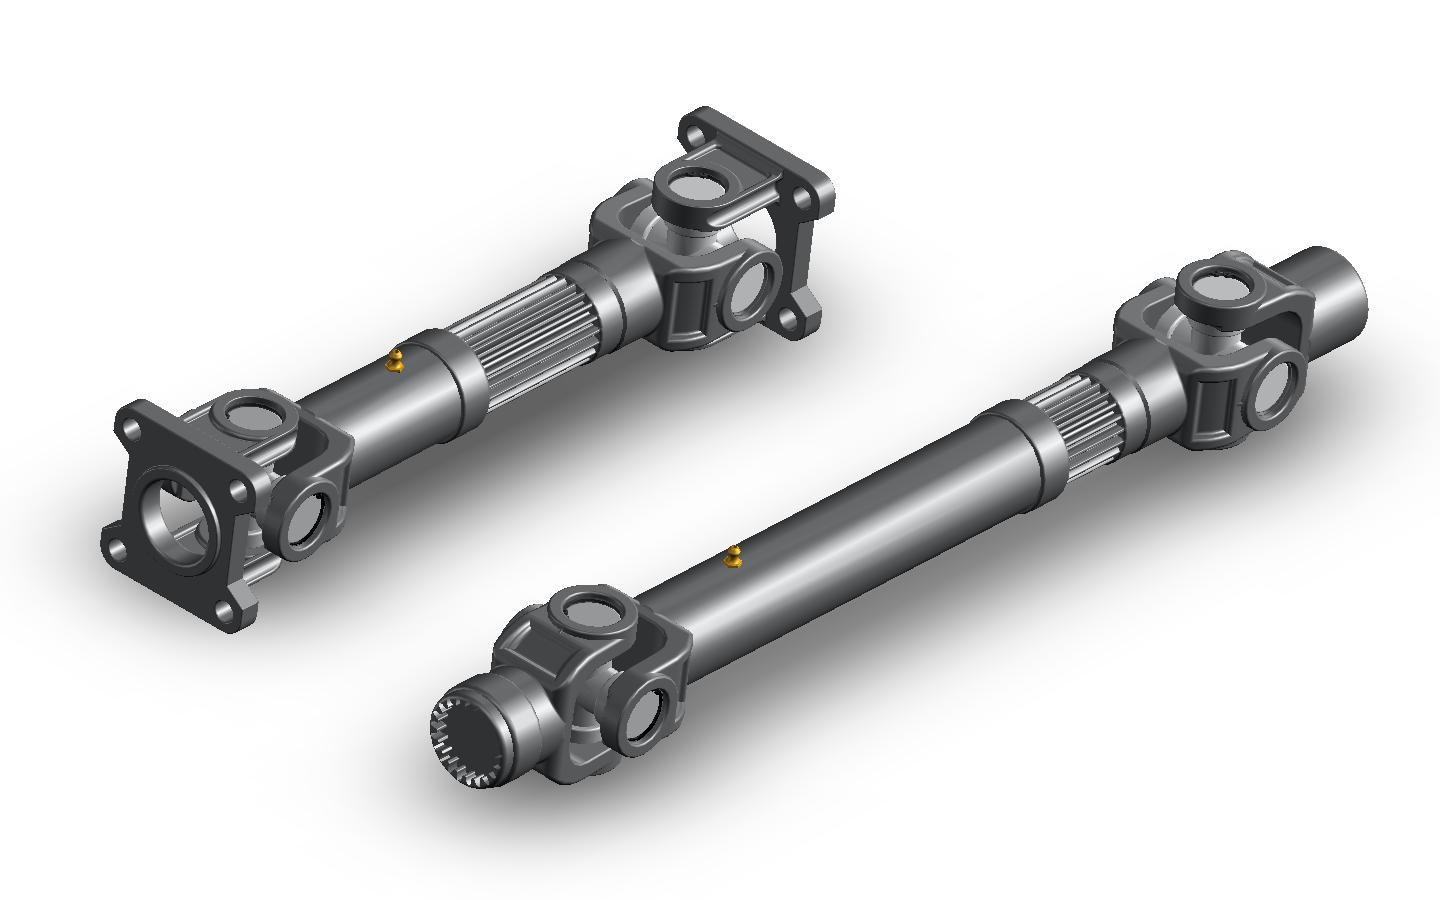 Composition and Application of Automobile Drive Shaft